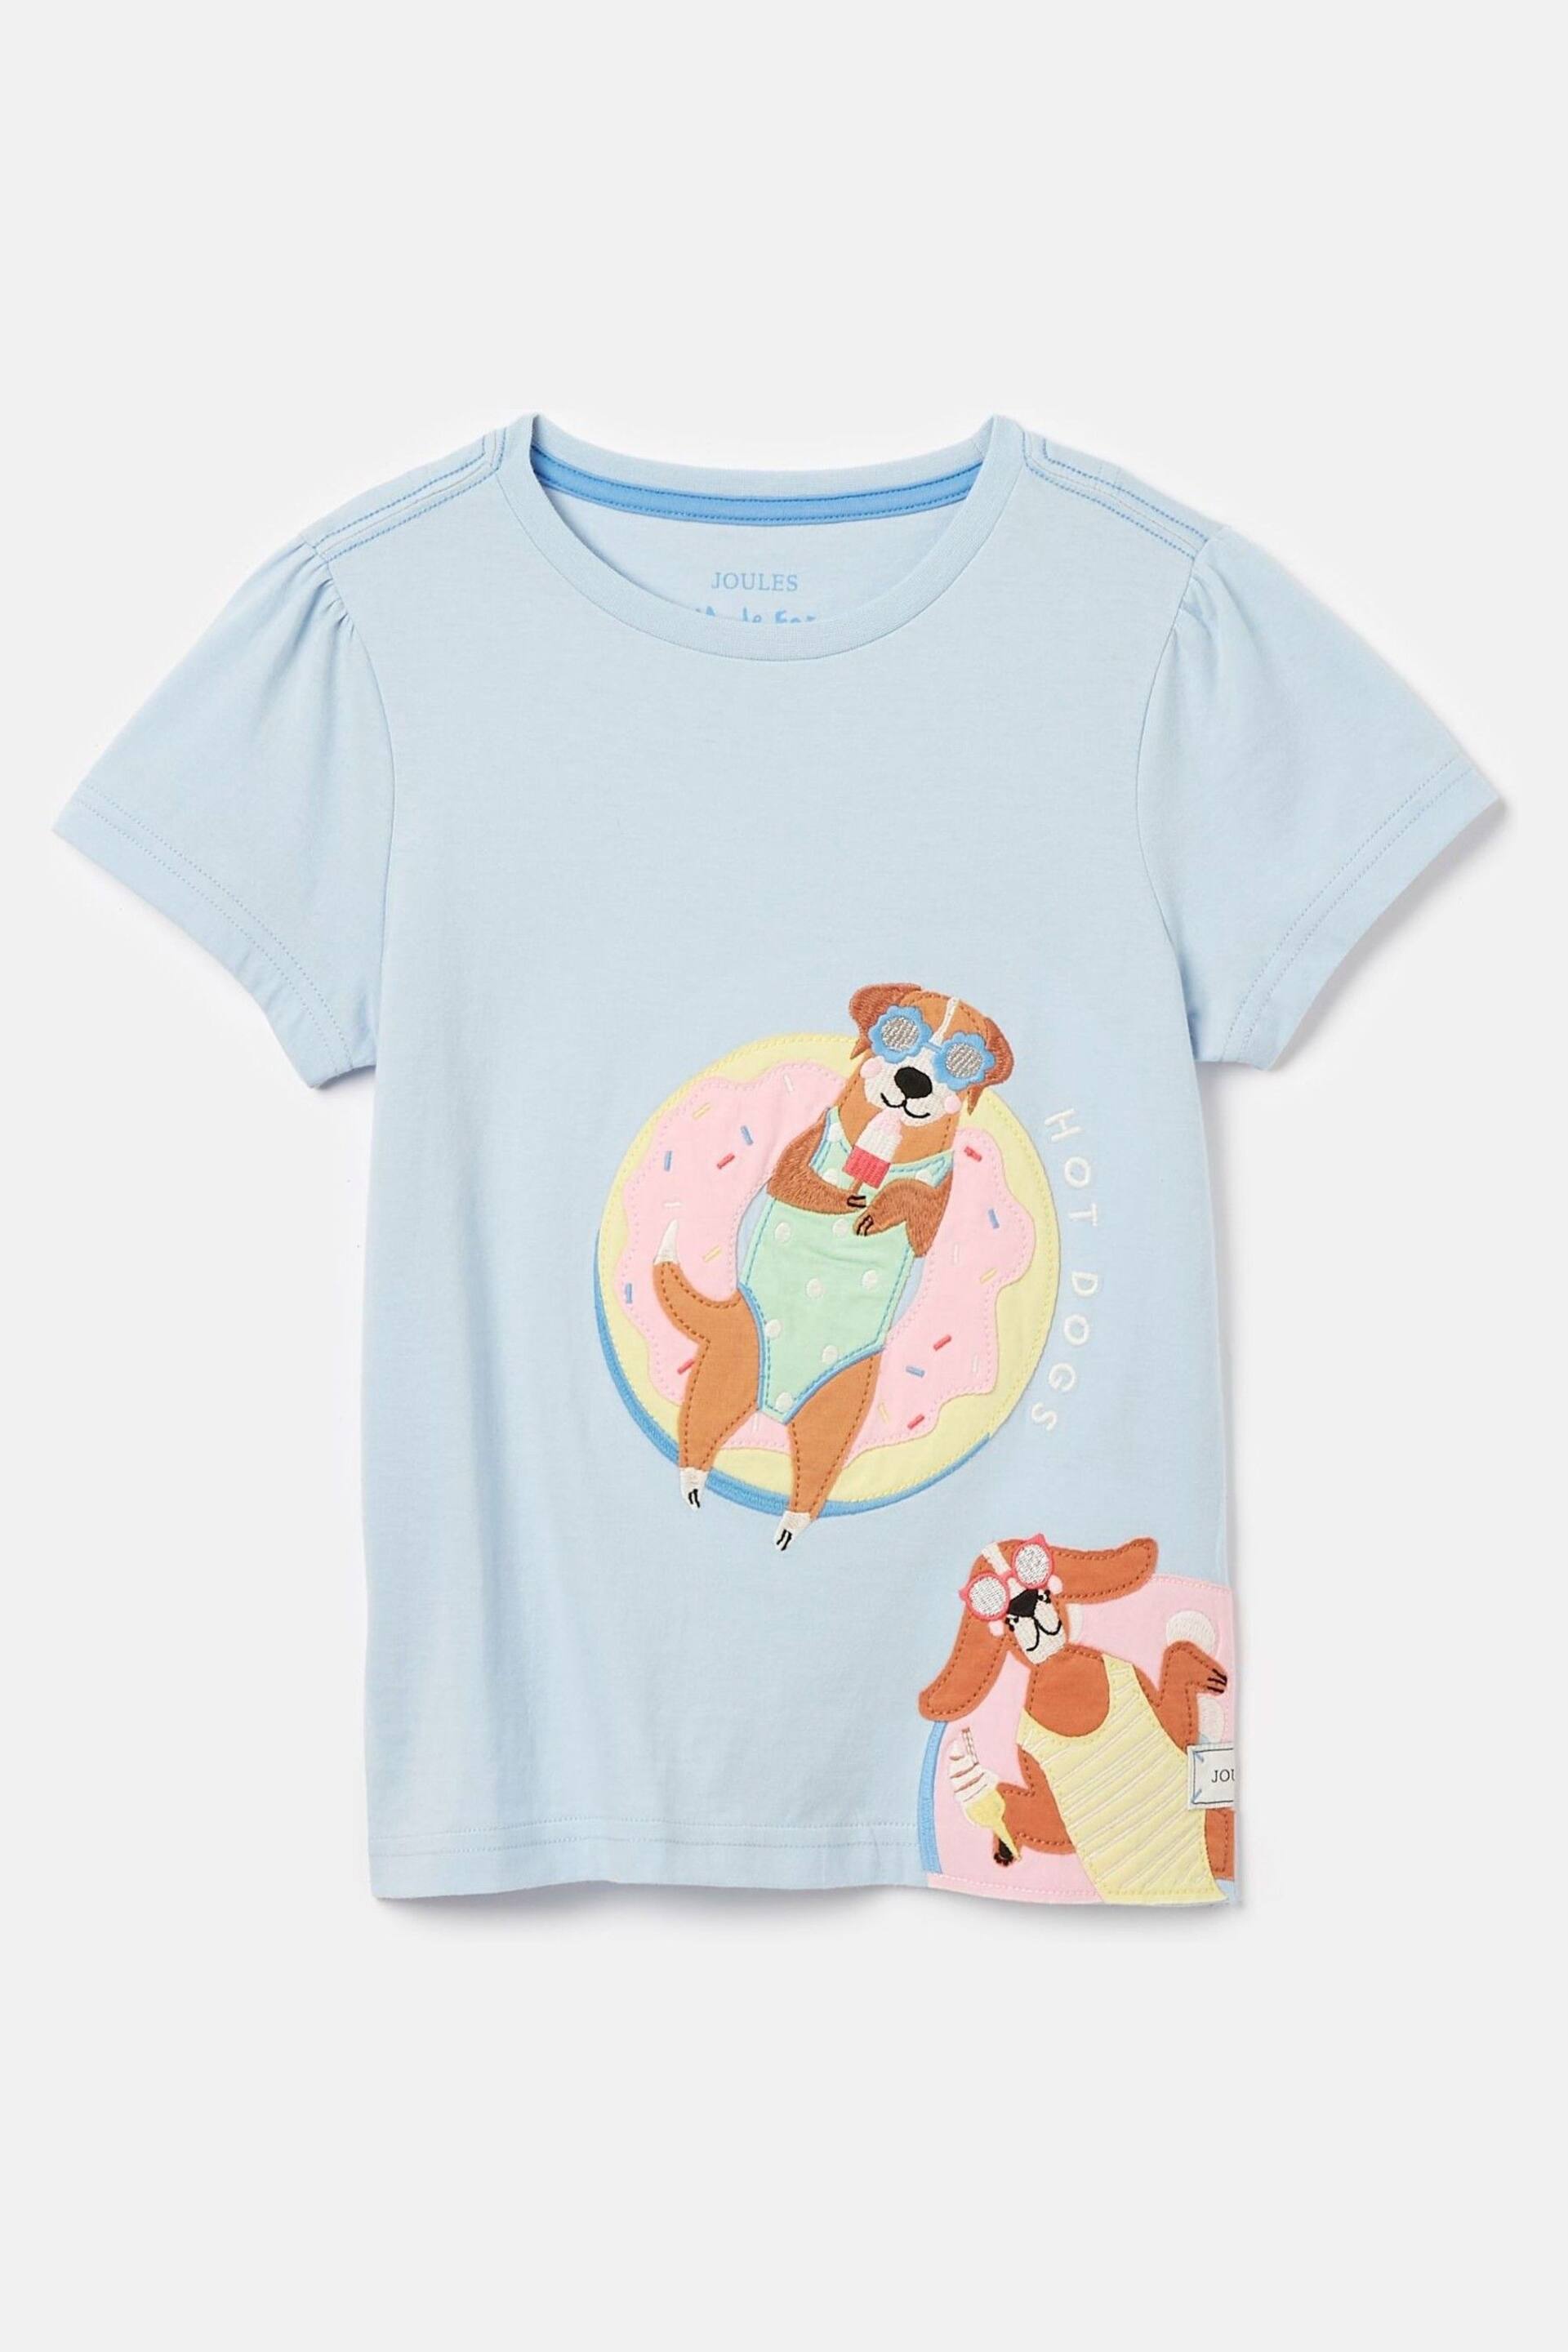 Joules Astra Blue Short Sleeve Artwork T-Shirt - Image 1 of 4